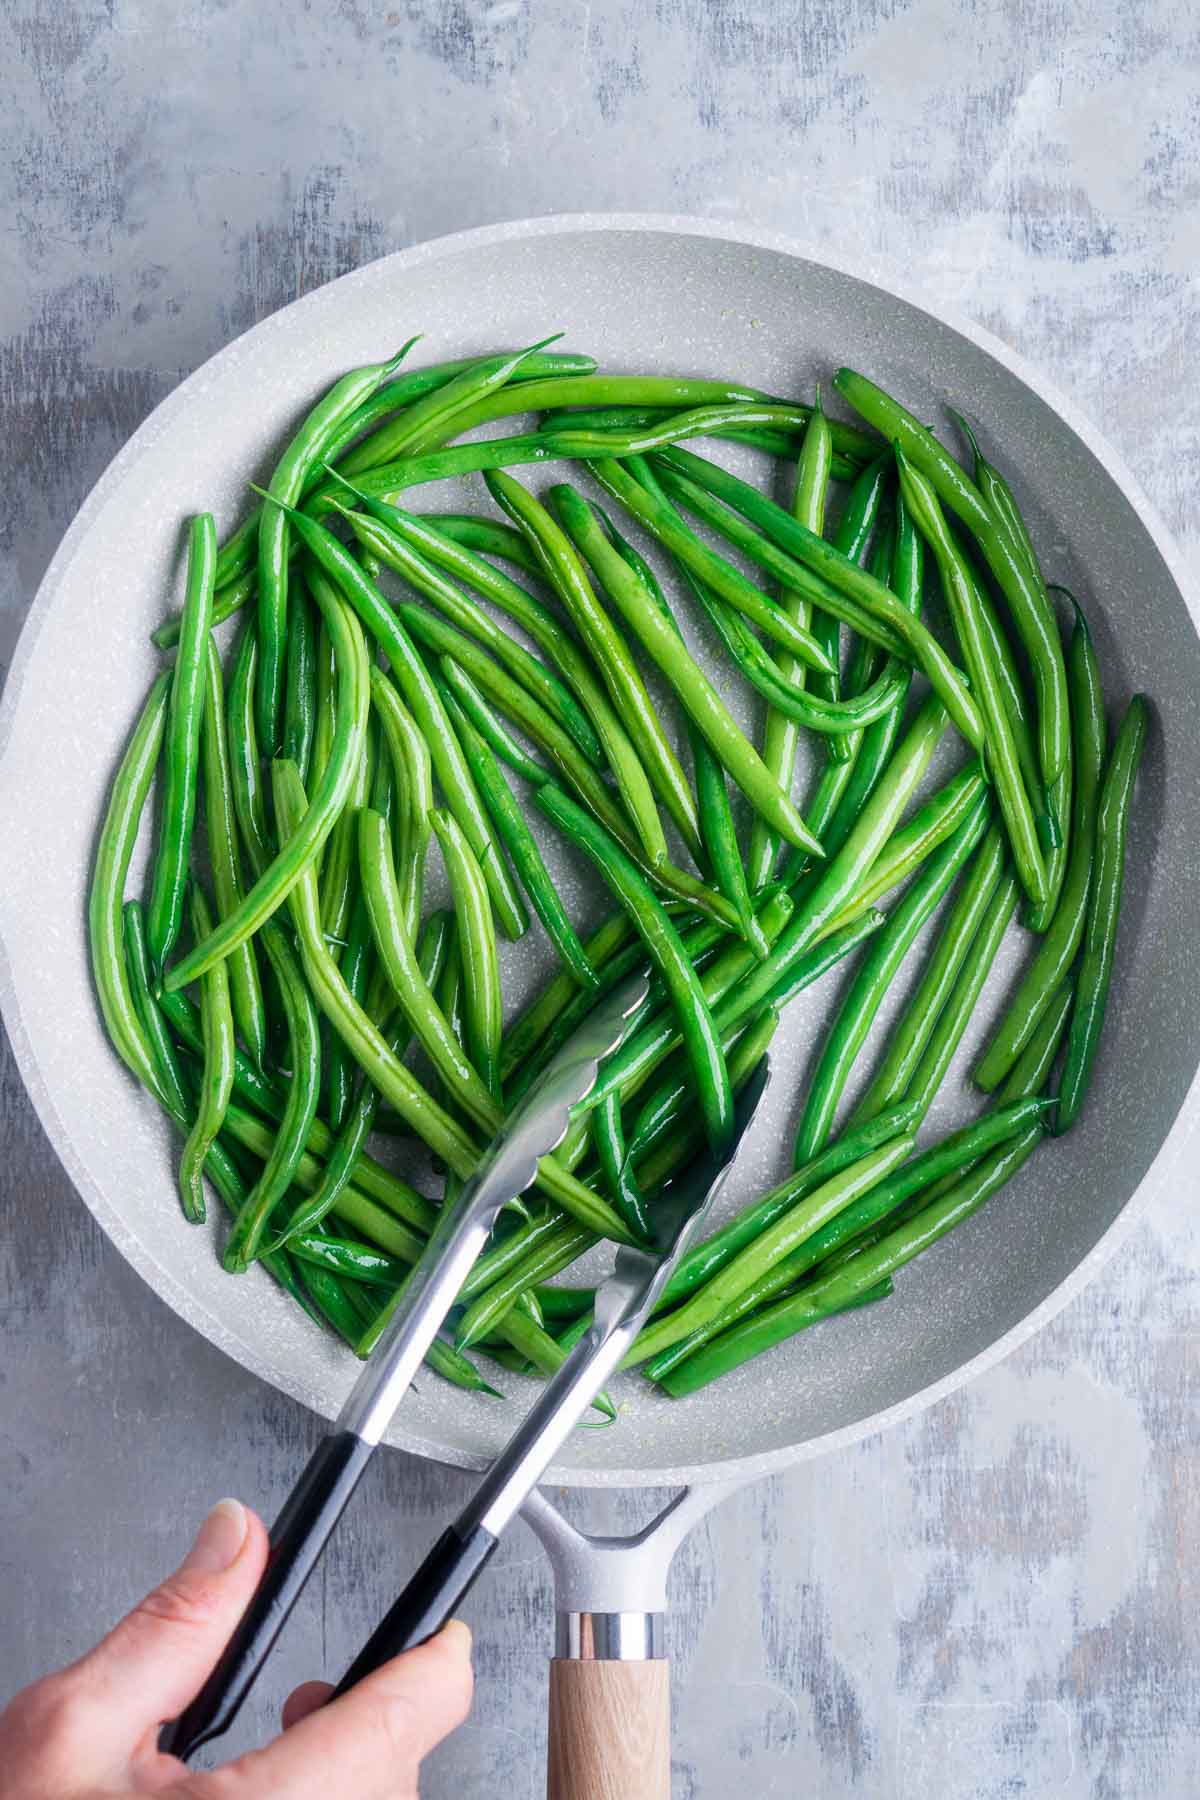 green beans sauteing in skillet are tossed with tongs